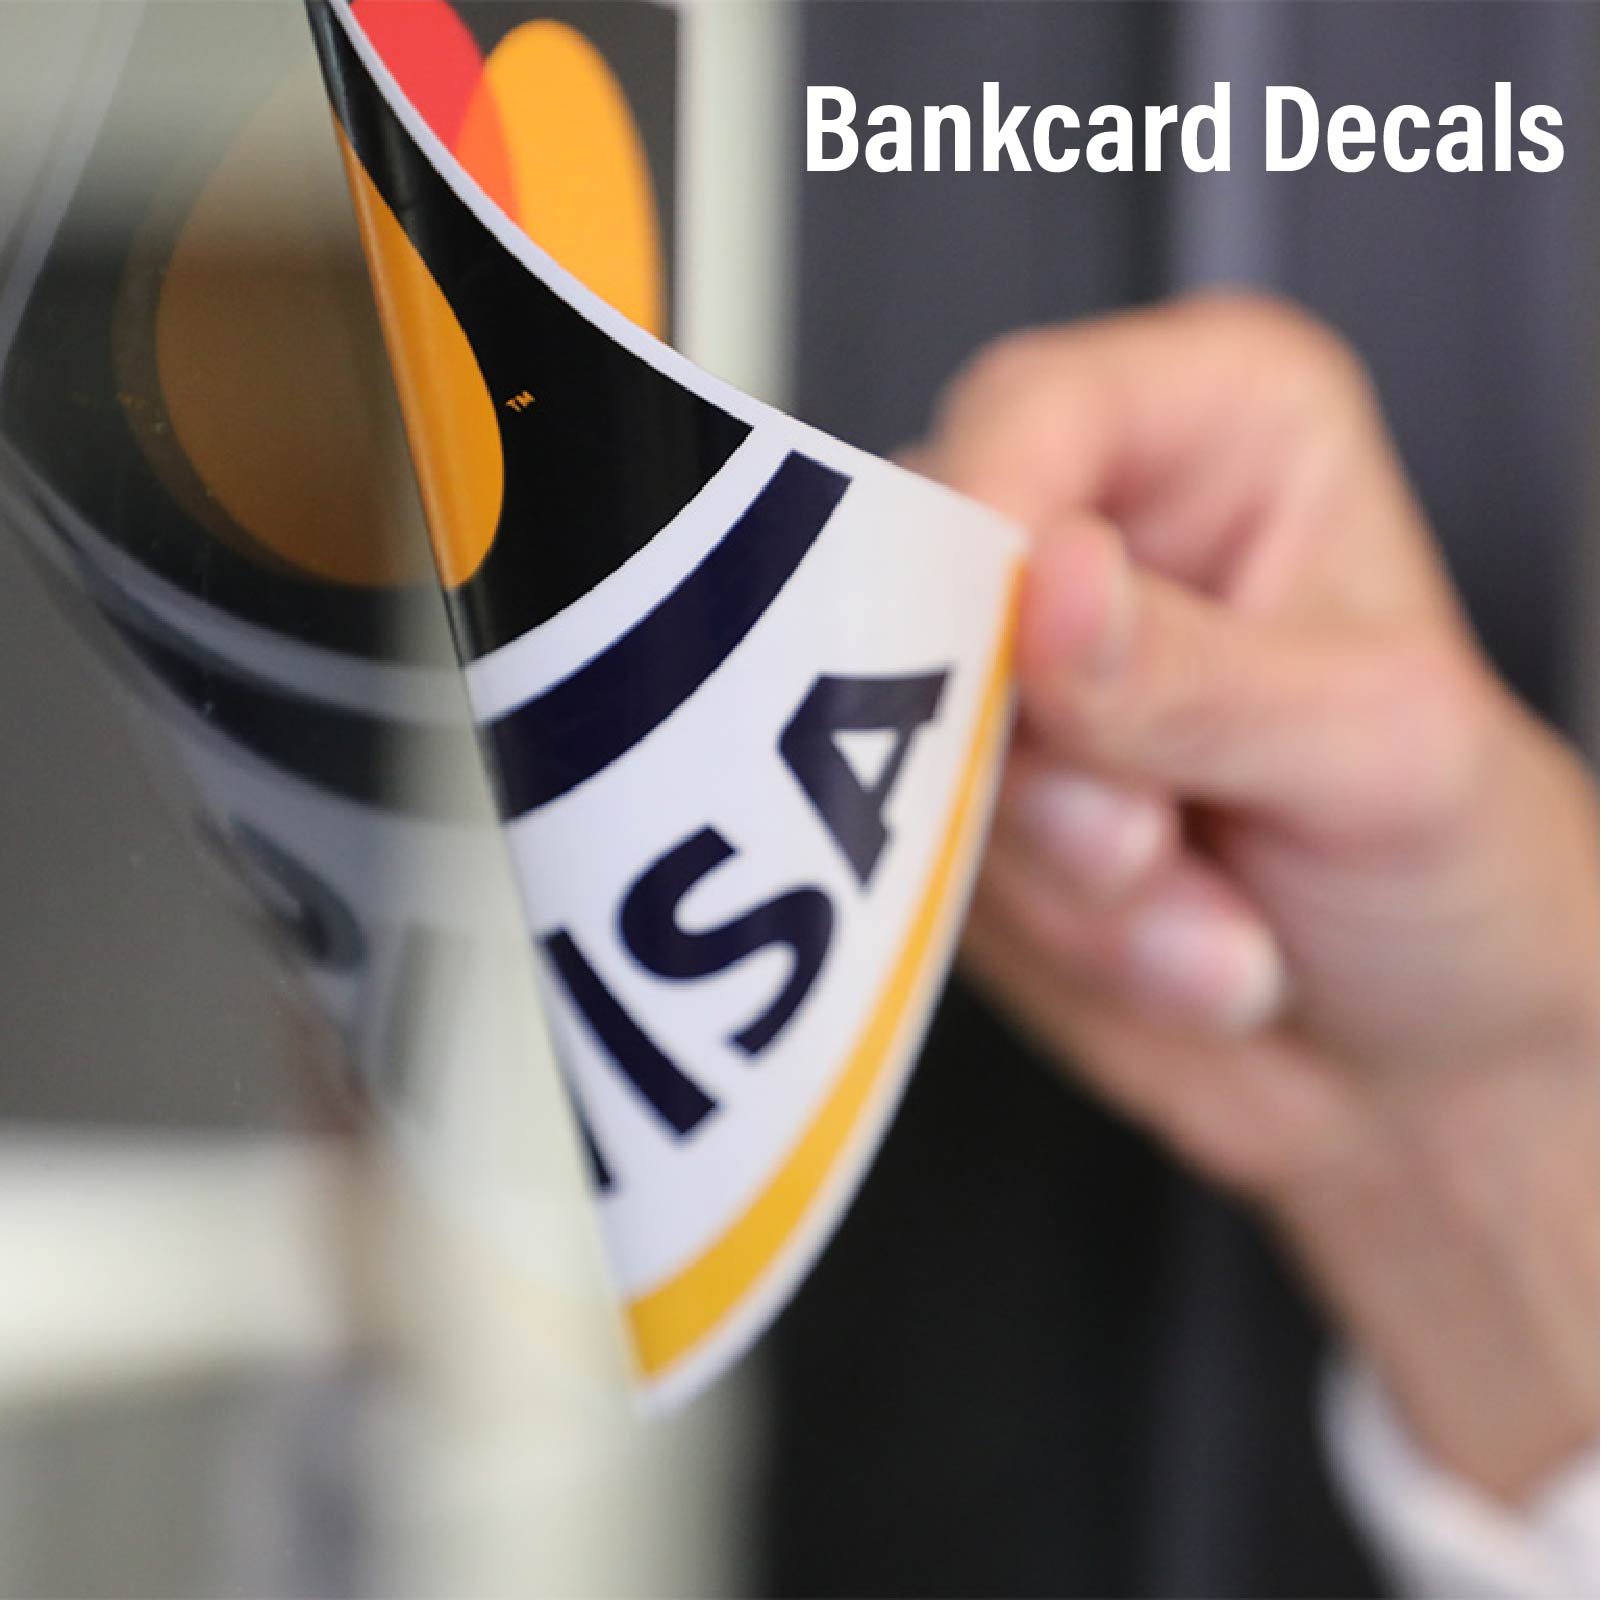 Bank card Decals and Supplies